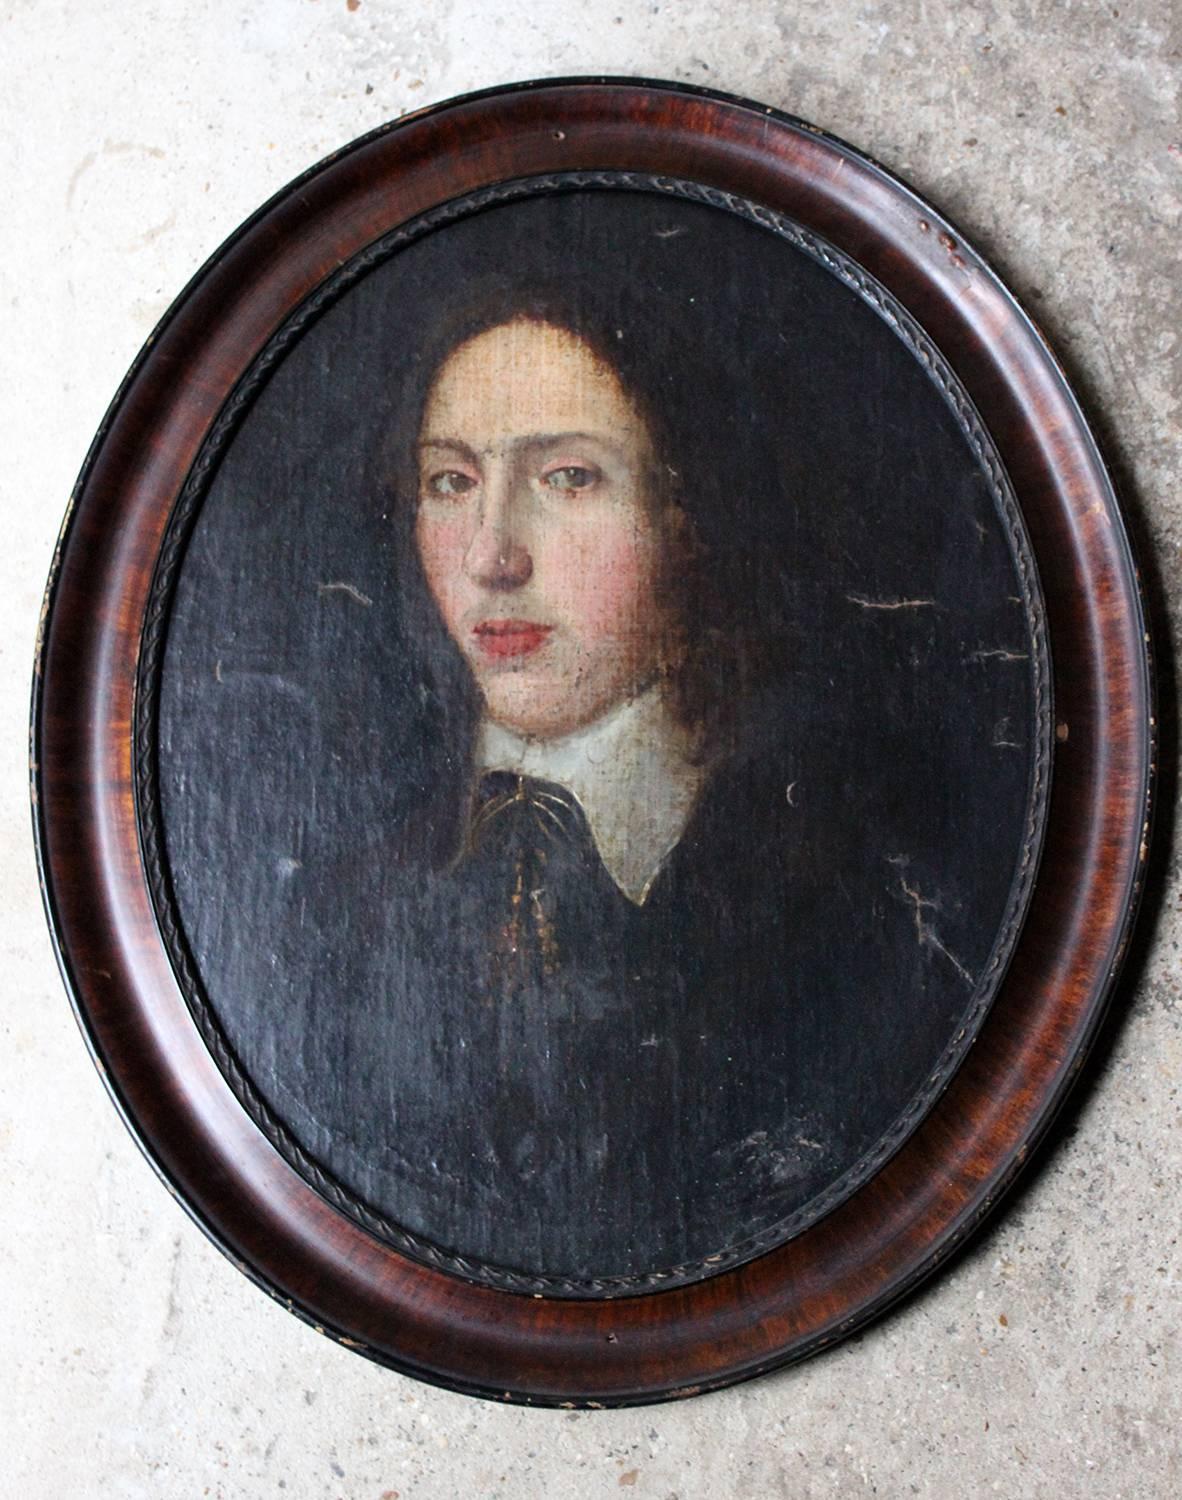 The half-length portrait in oval form of a dashing young French gentleman having long hair, and looking directly out to the viewer, painted in oils on canvas laid down to board, the sitter shown in a black over garment with a white collared under